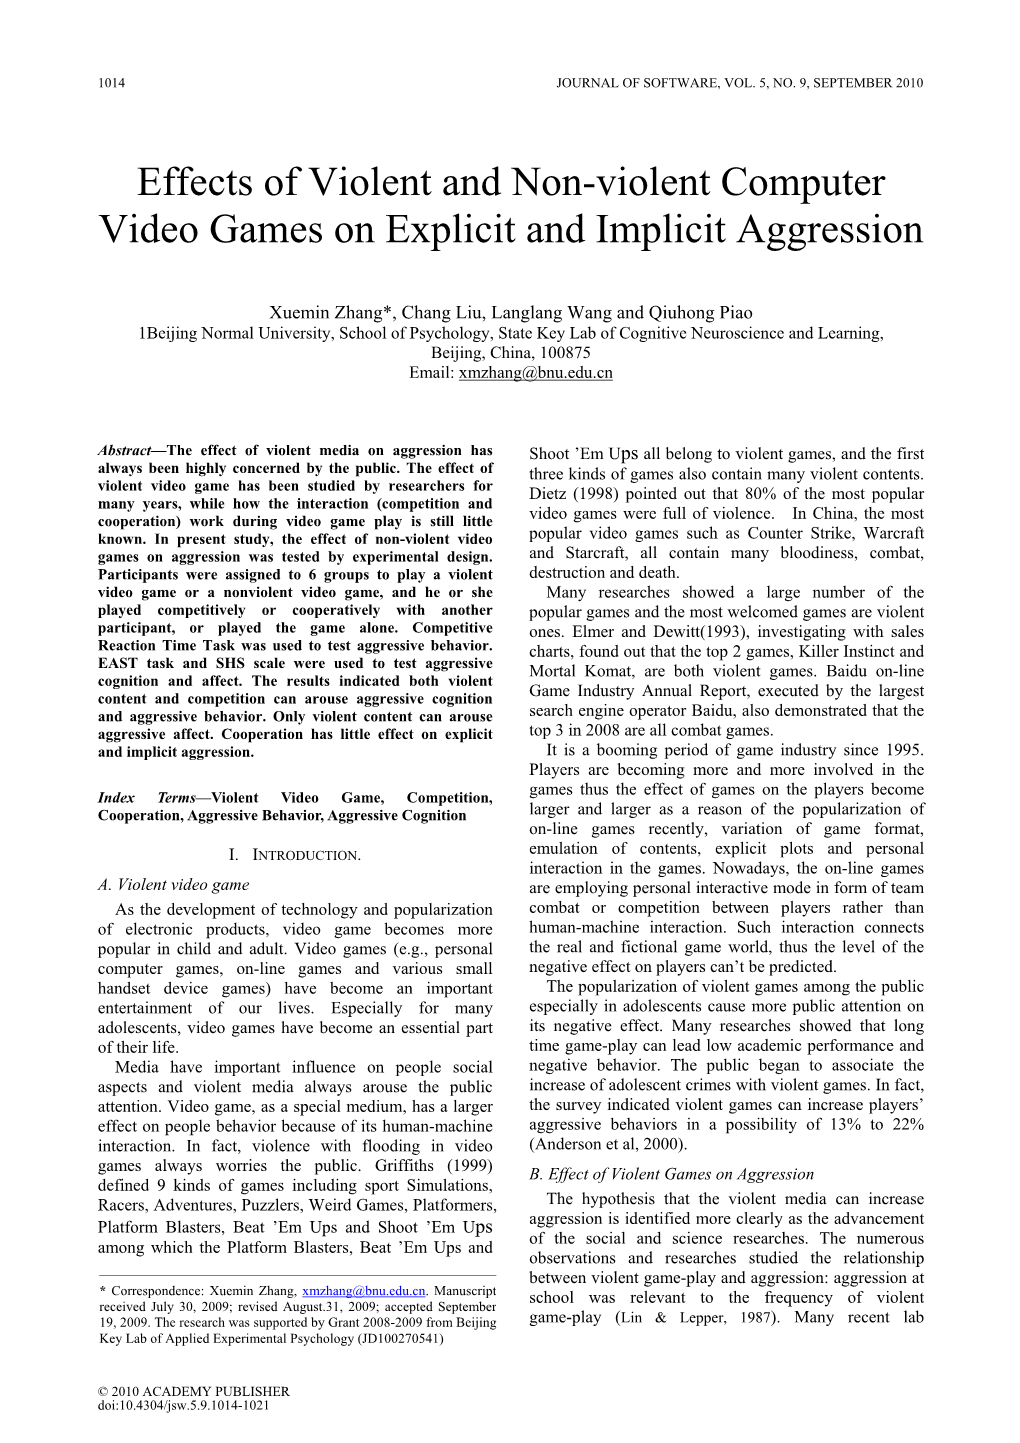 Effects of Violent and Non-Violent Computer Video Games on Explicit and Implicit Aggression